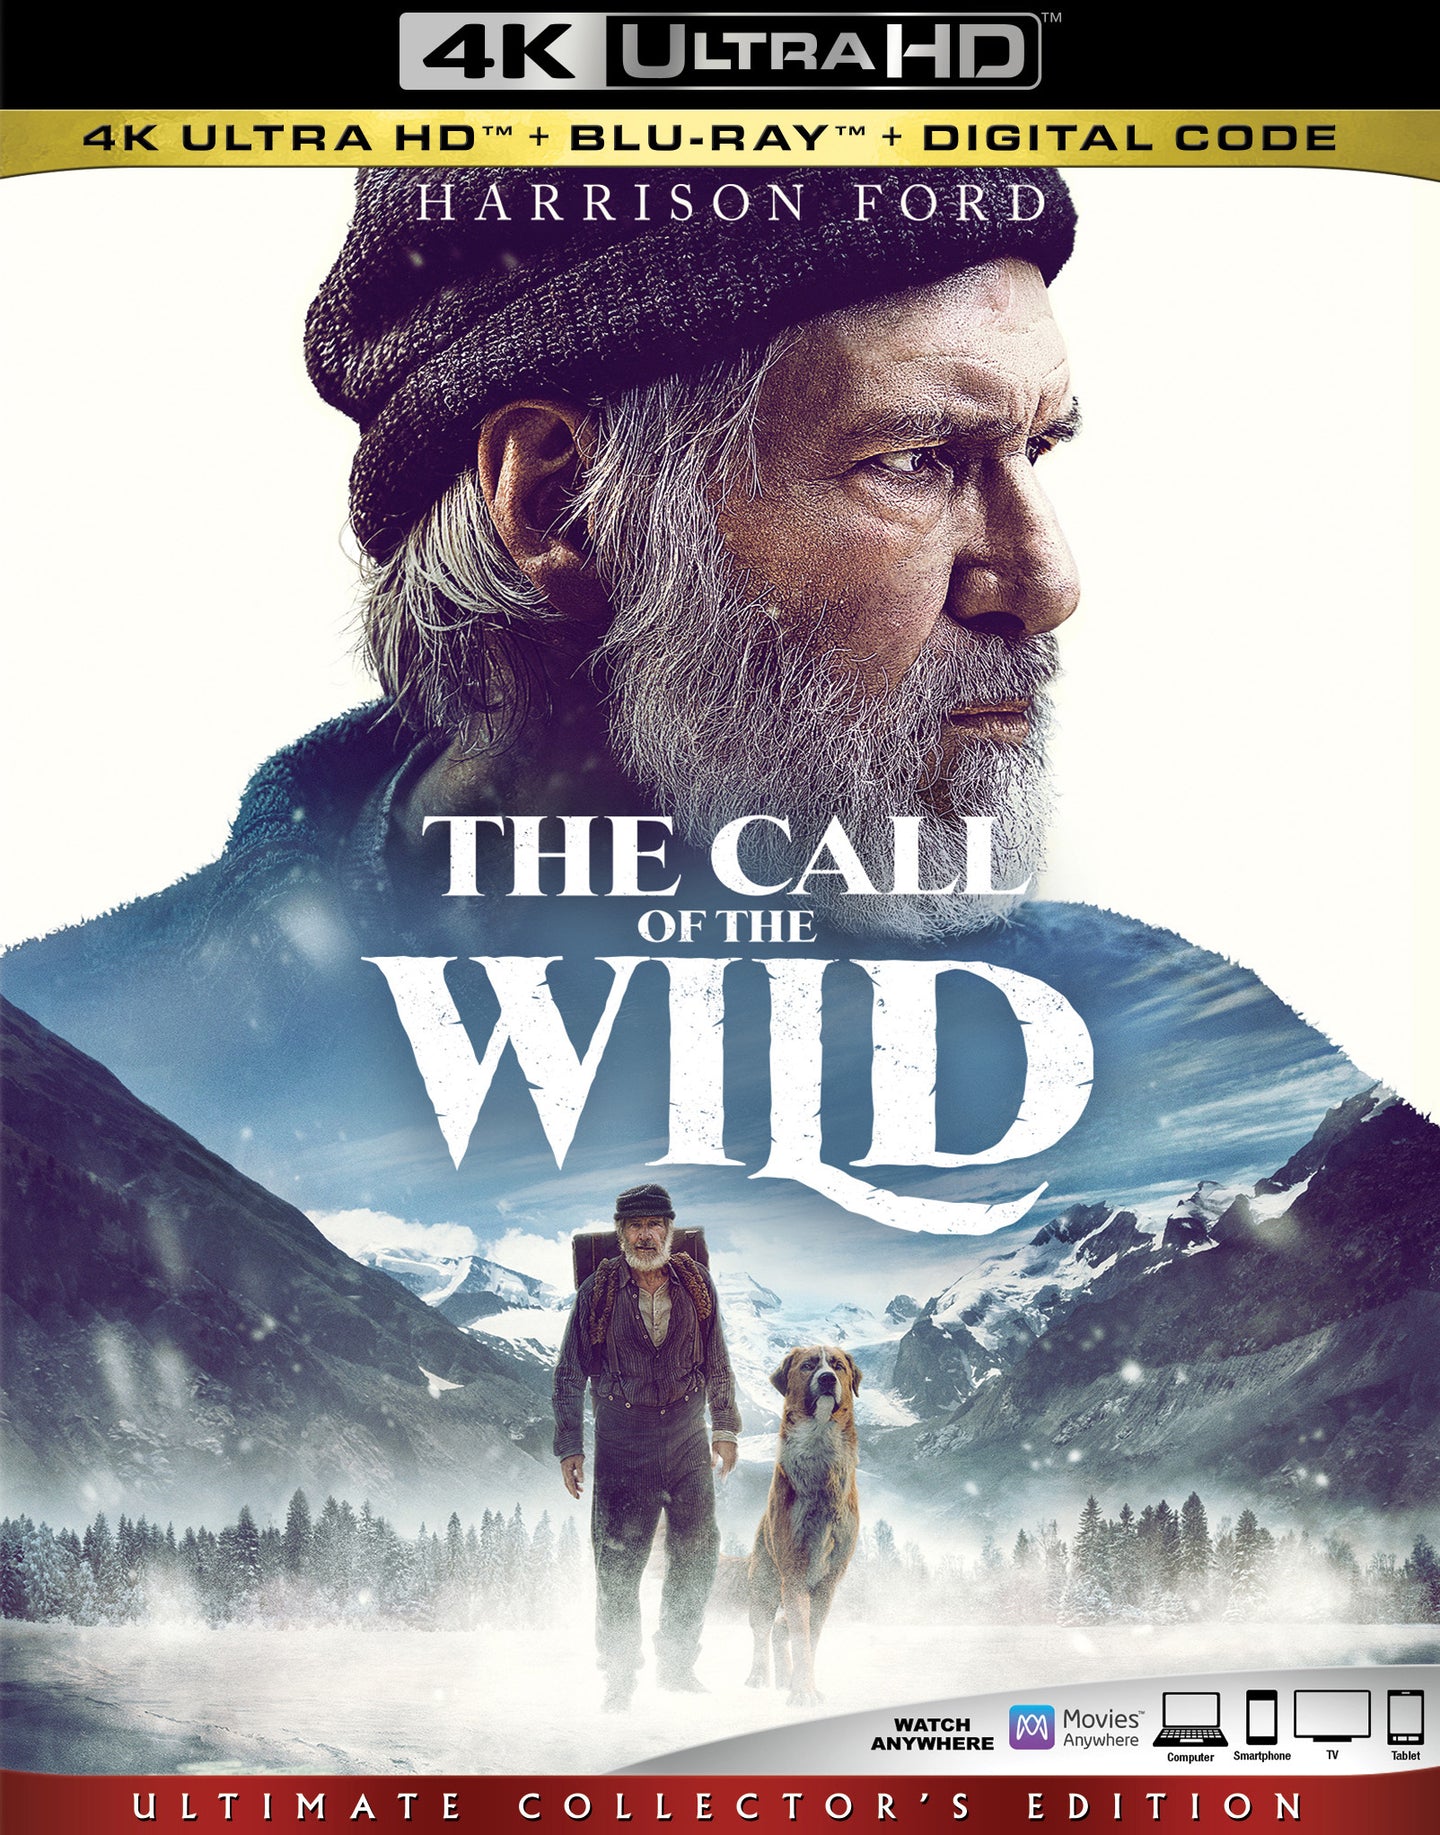 The Call of the Wild (2020) Vudu or Movies Anywhere 4K redemption only